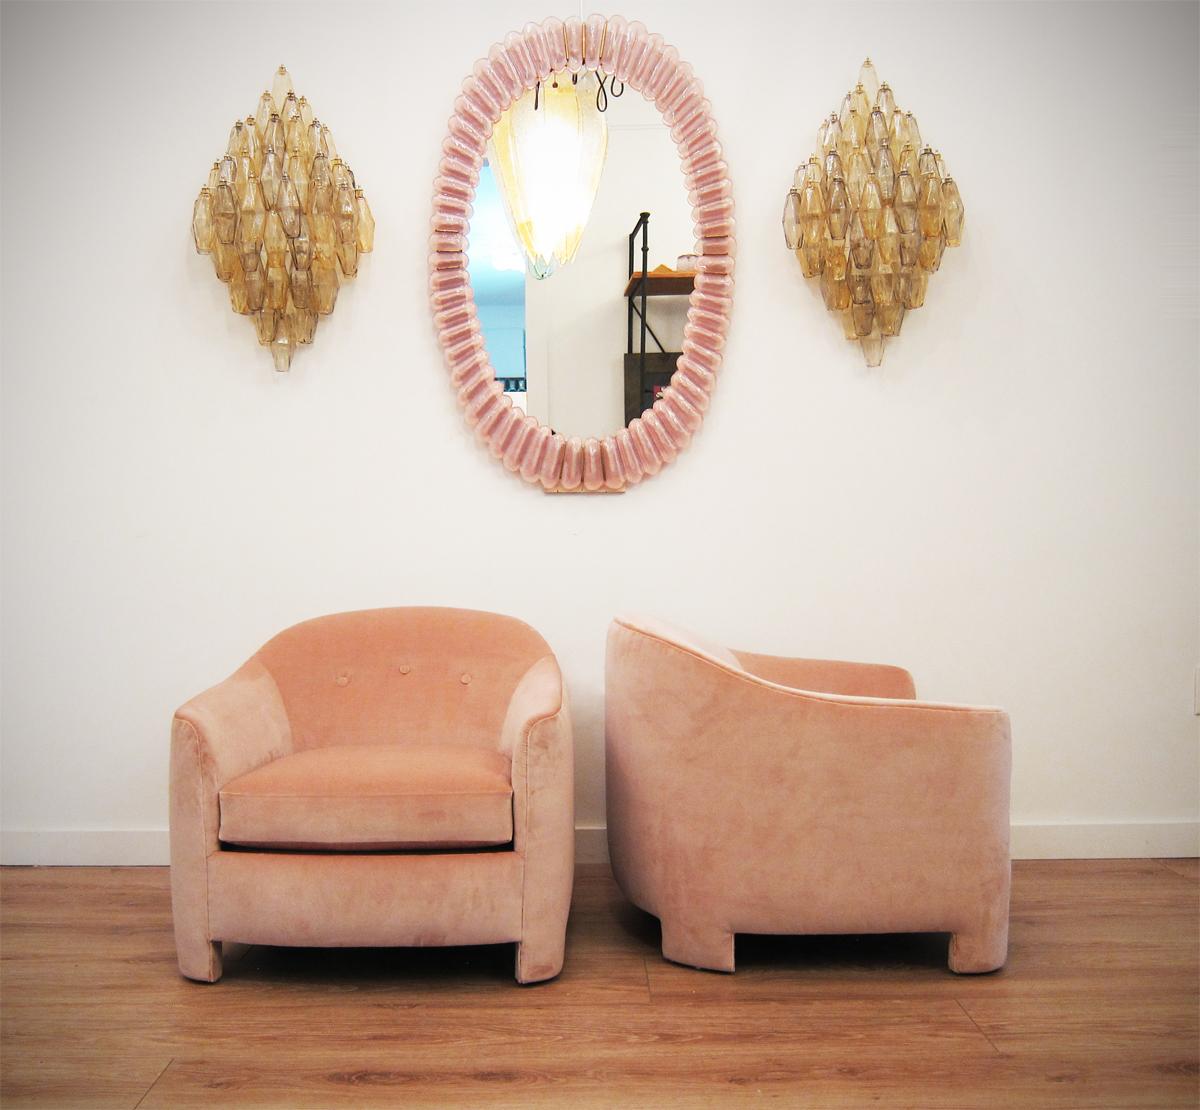 Curvaceous pair of barrel back lounge or bedroom chairs in rose or pink velvet
Stunning design from all angles
Carefully restored and upholstered in high-end soft pink velvet.
Available to view in situ at our showroom in Miami.